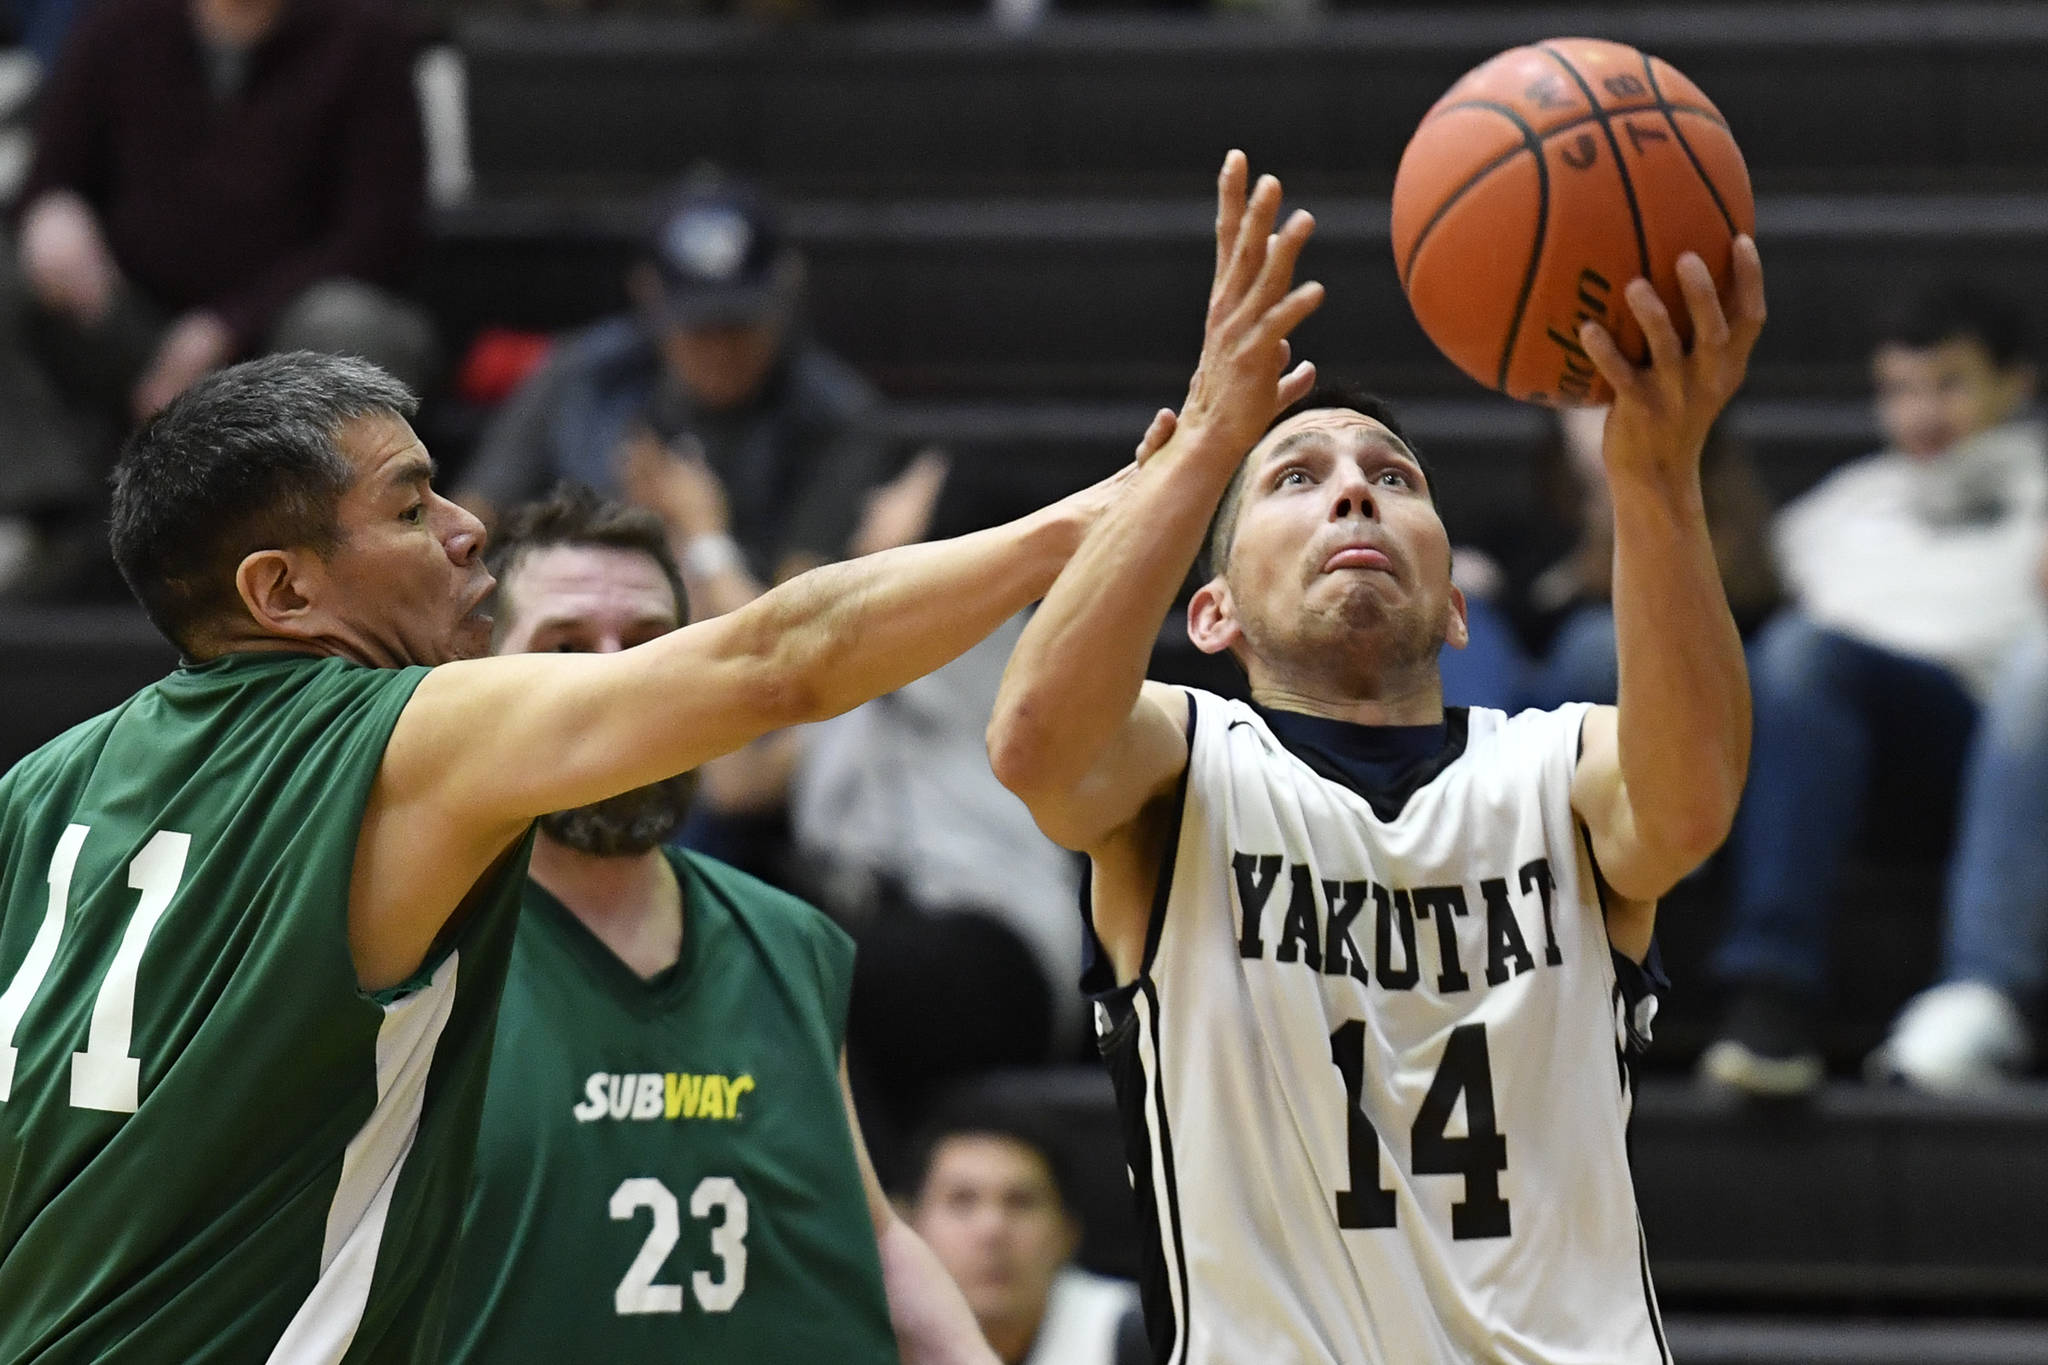 Yakutat’s Ralph Johnson, left, shoots against Sitka’s Ray Kitka in a masters bracket game at the Juneau Lions Club 73rd Annual Gold Medal Basketball Tournament at Juneau-Douglas High School: Yadaa.at Kalé on Wednesday, March 20, 2019. Yakutat won 66-49. (Michael Penn | Juneau Empire)